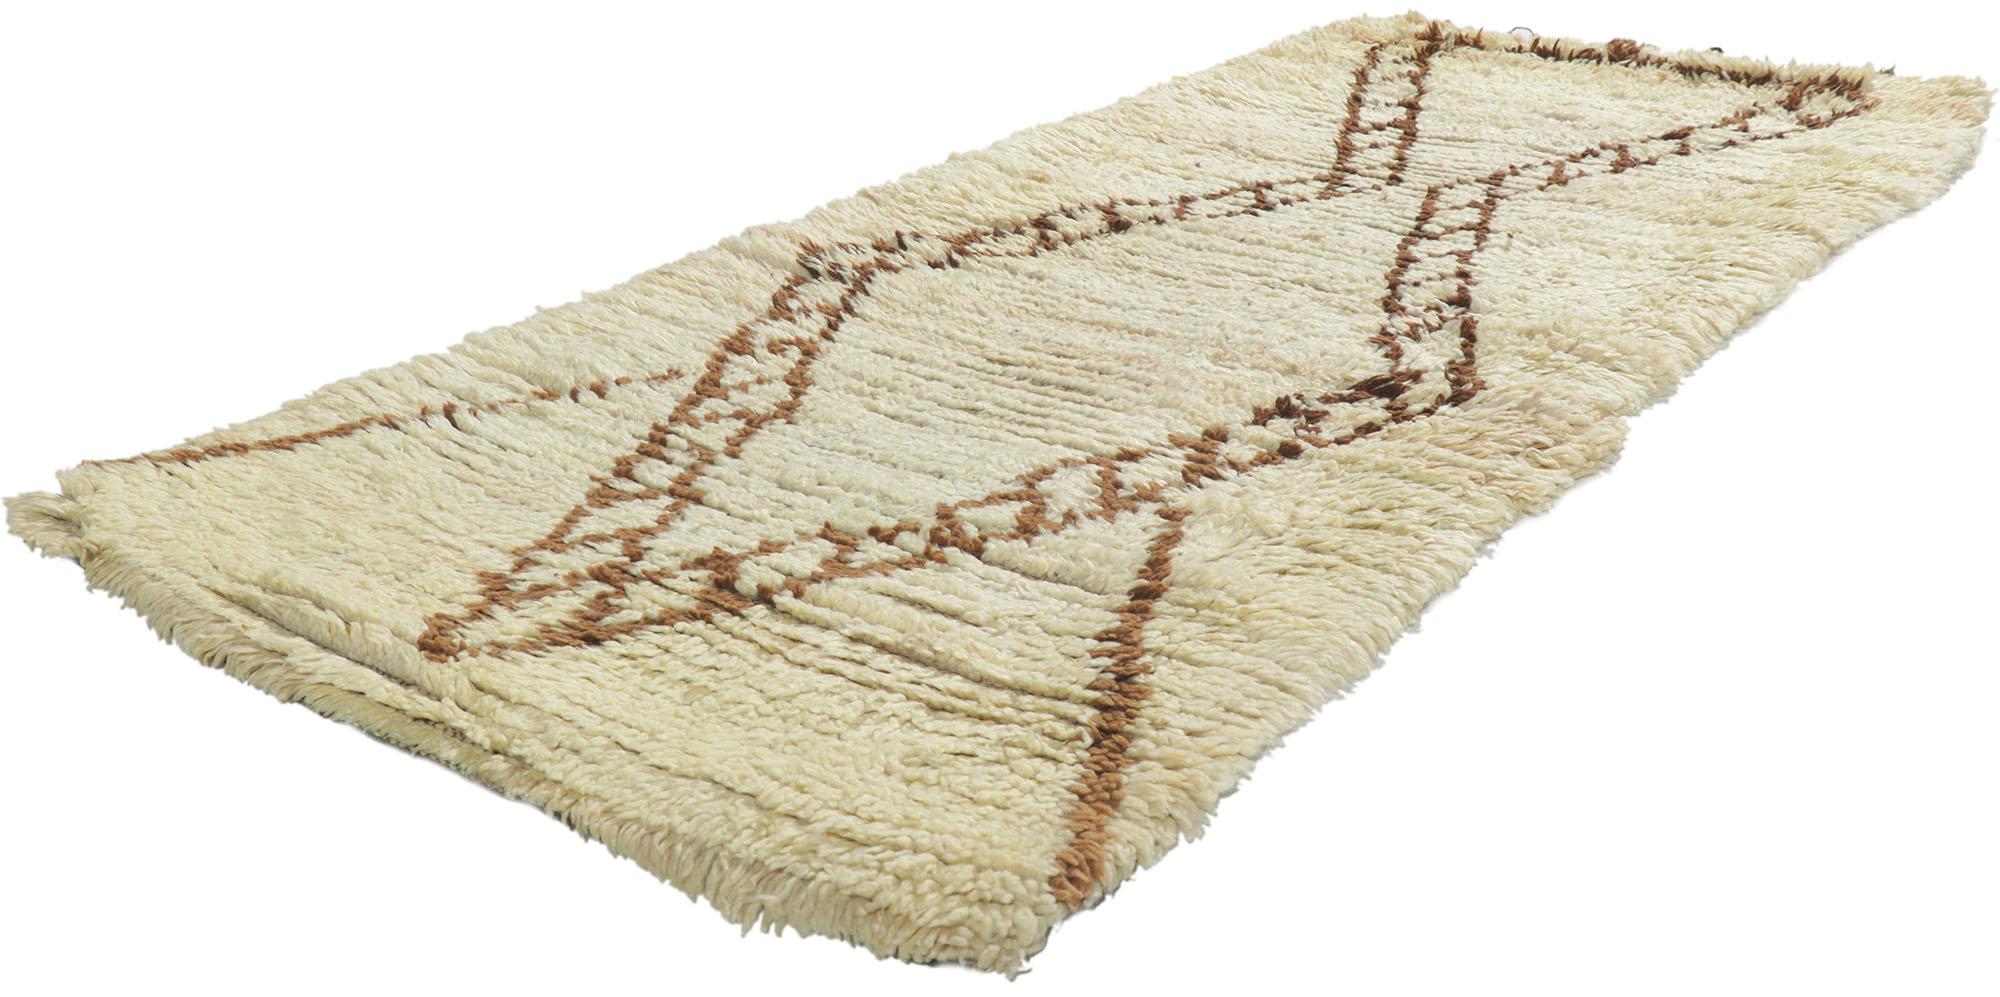 21616 Vintage Berber Moroccan Azilal Rug, 02'08 x 06'00. With its simplicity, Mid-Century Modern style, incredible detail and texture, this hand knotted wool vintage Berber Moroccan Azilal rug is a captivating vision of woven beauty. The abrashed